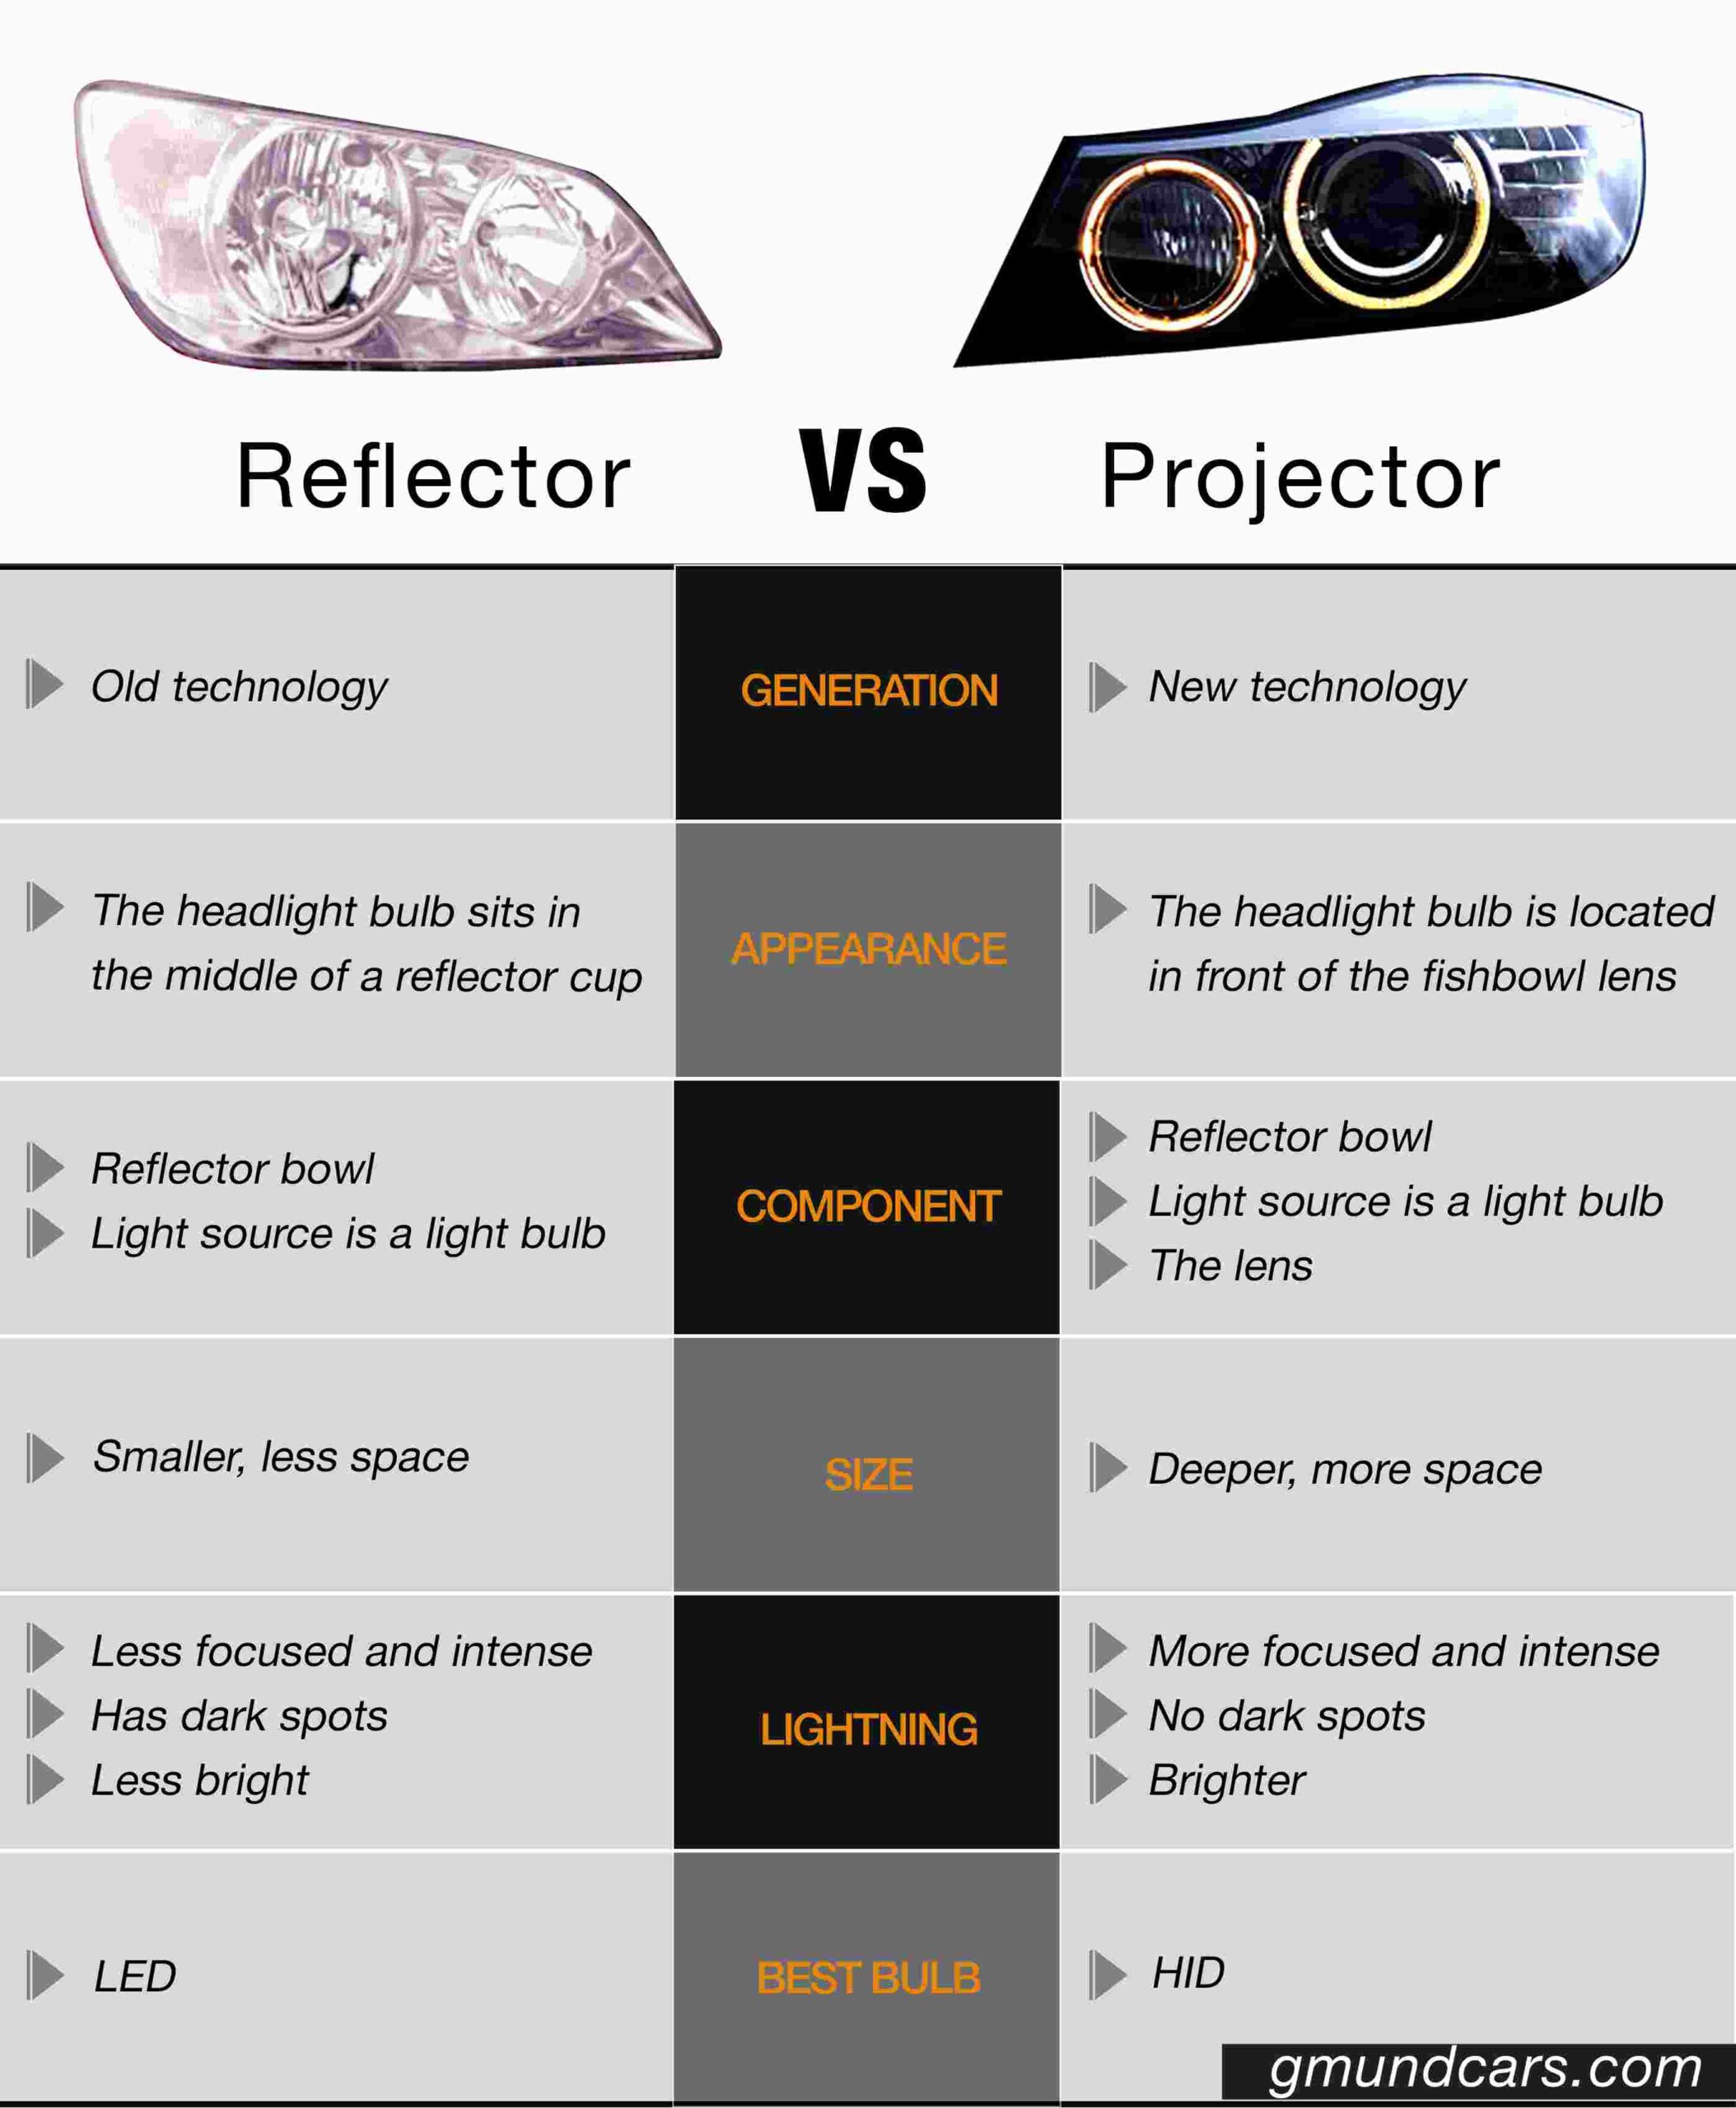 Reflector vs. Projector key differences